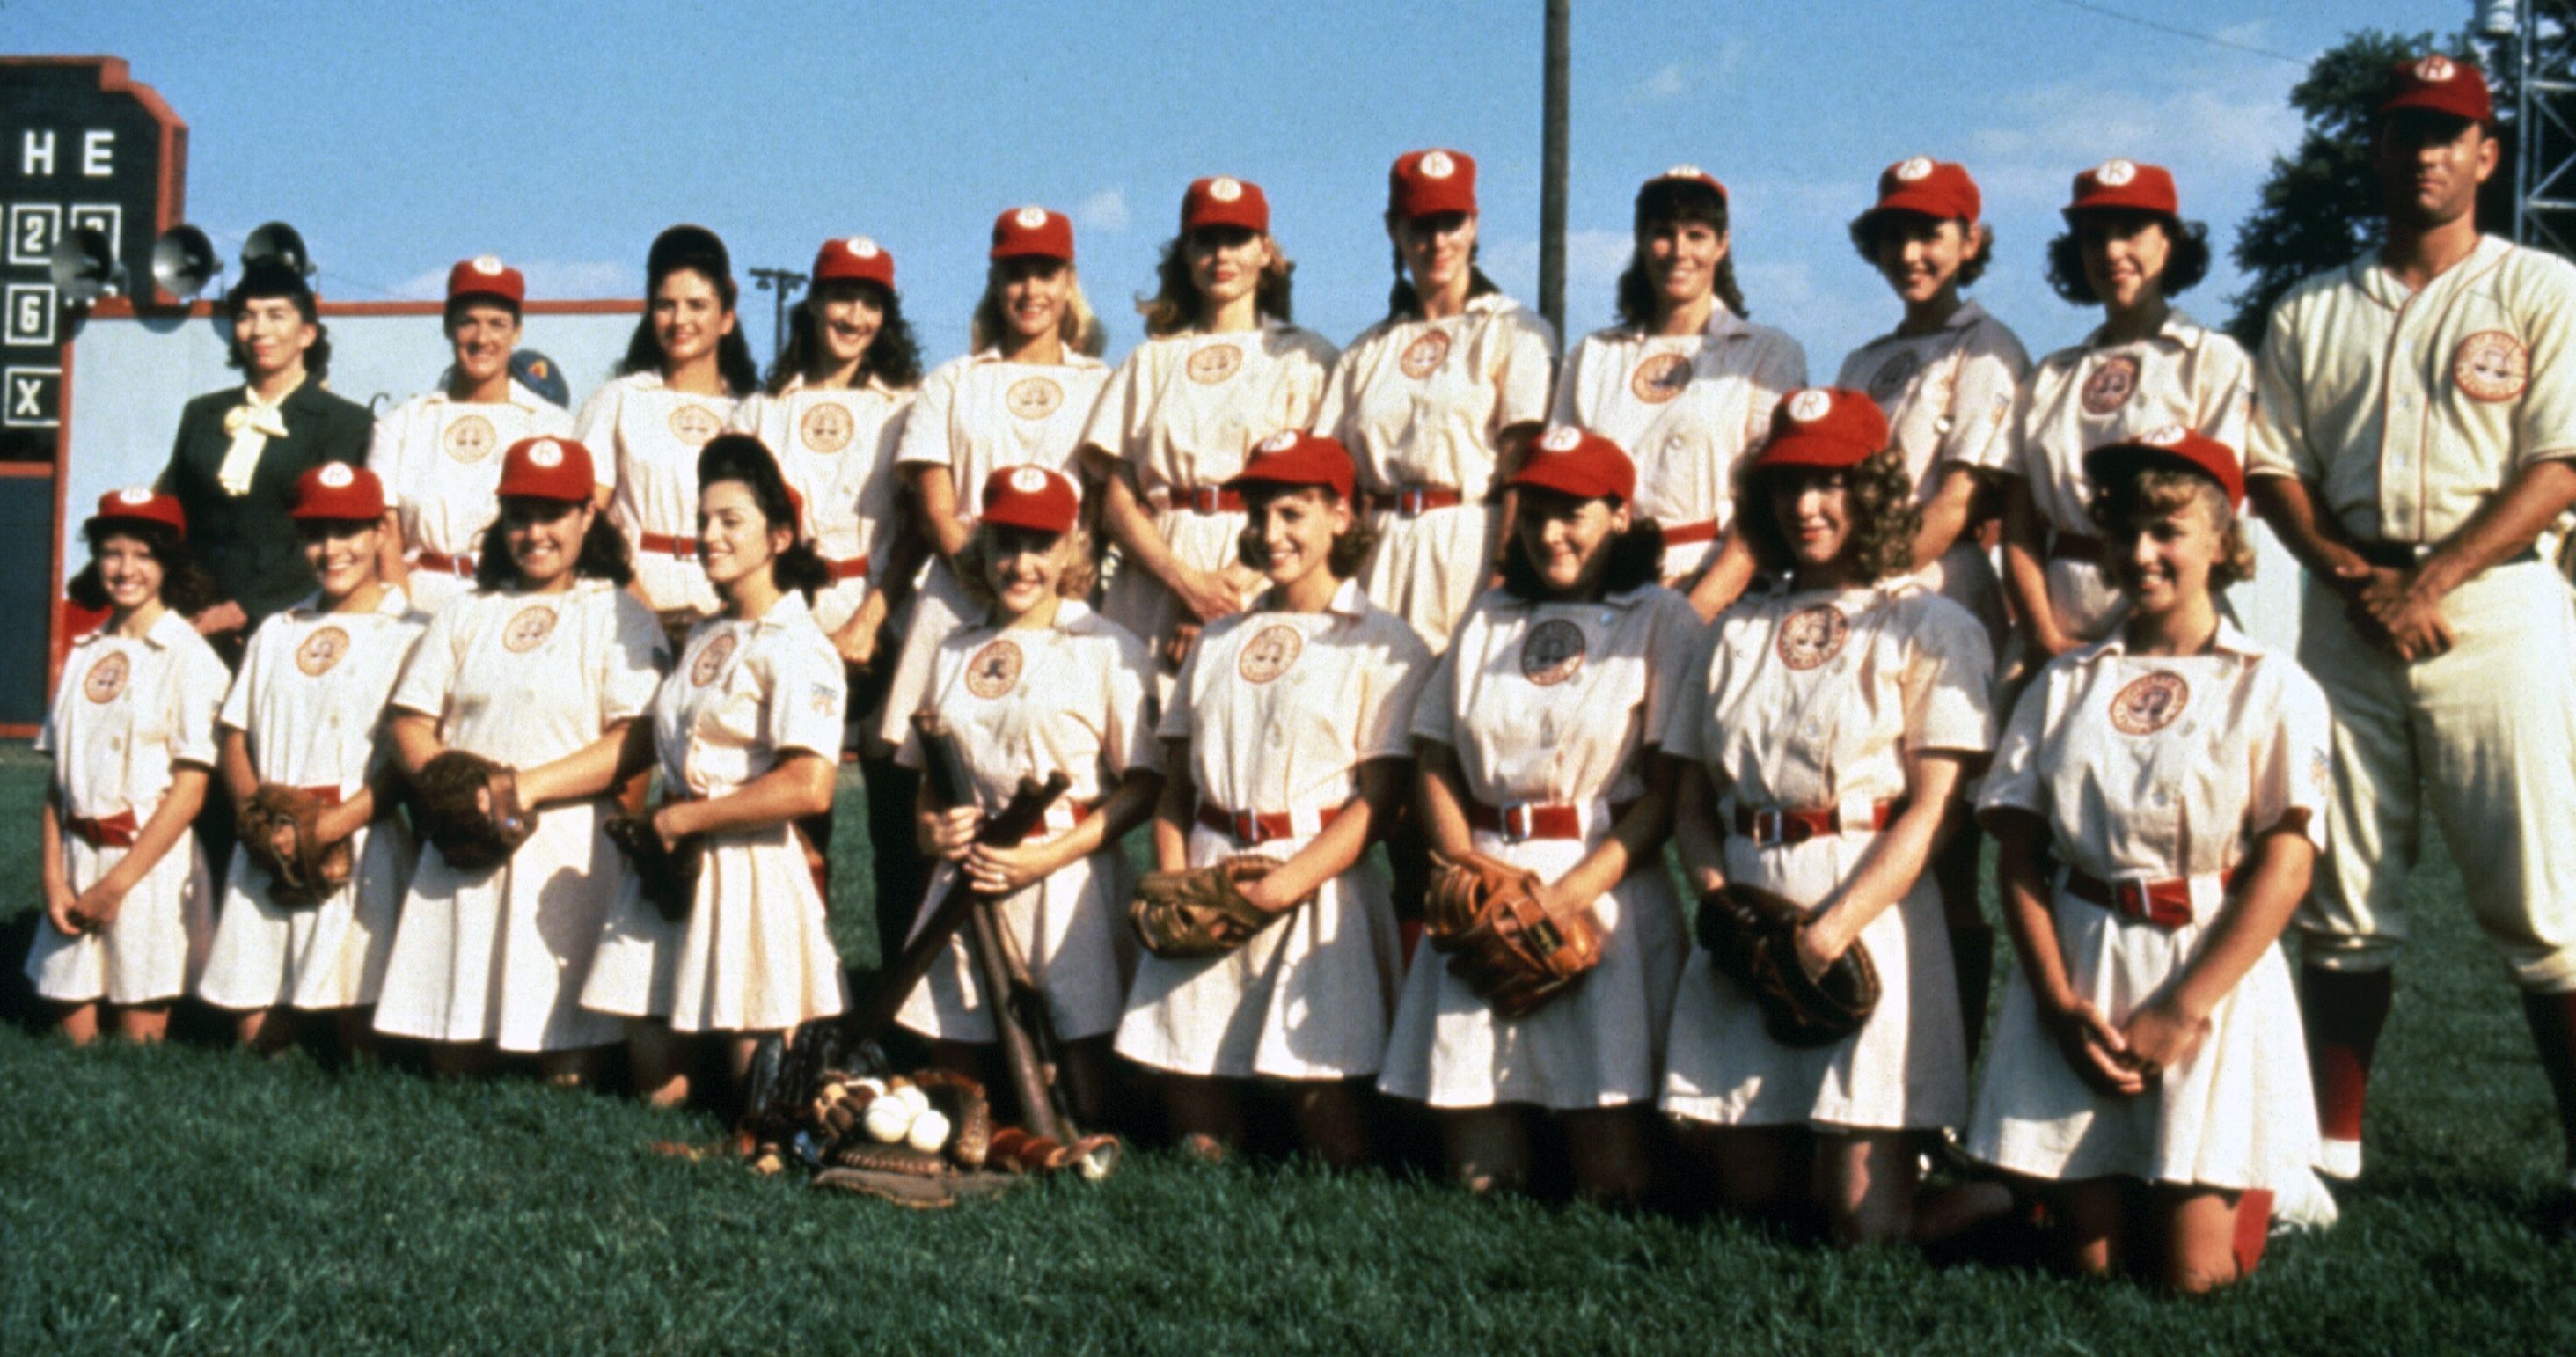 A League of Their Own Amazon Prime Series Expands Cast with Six New Additions